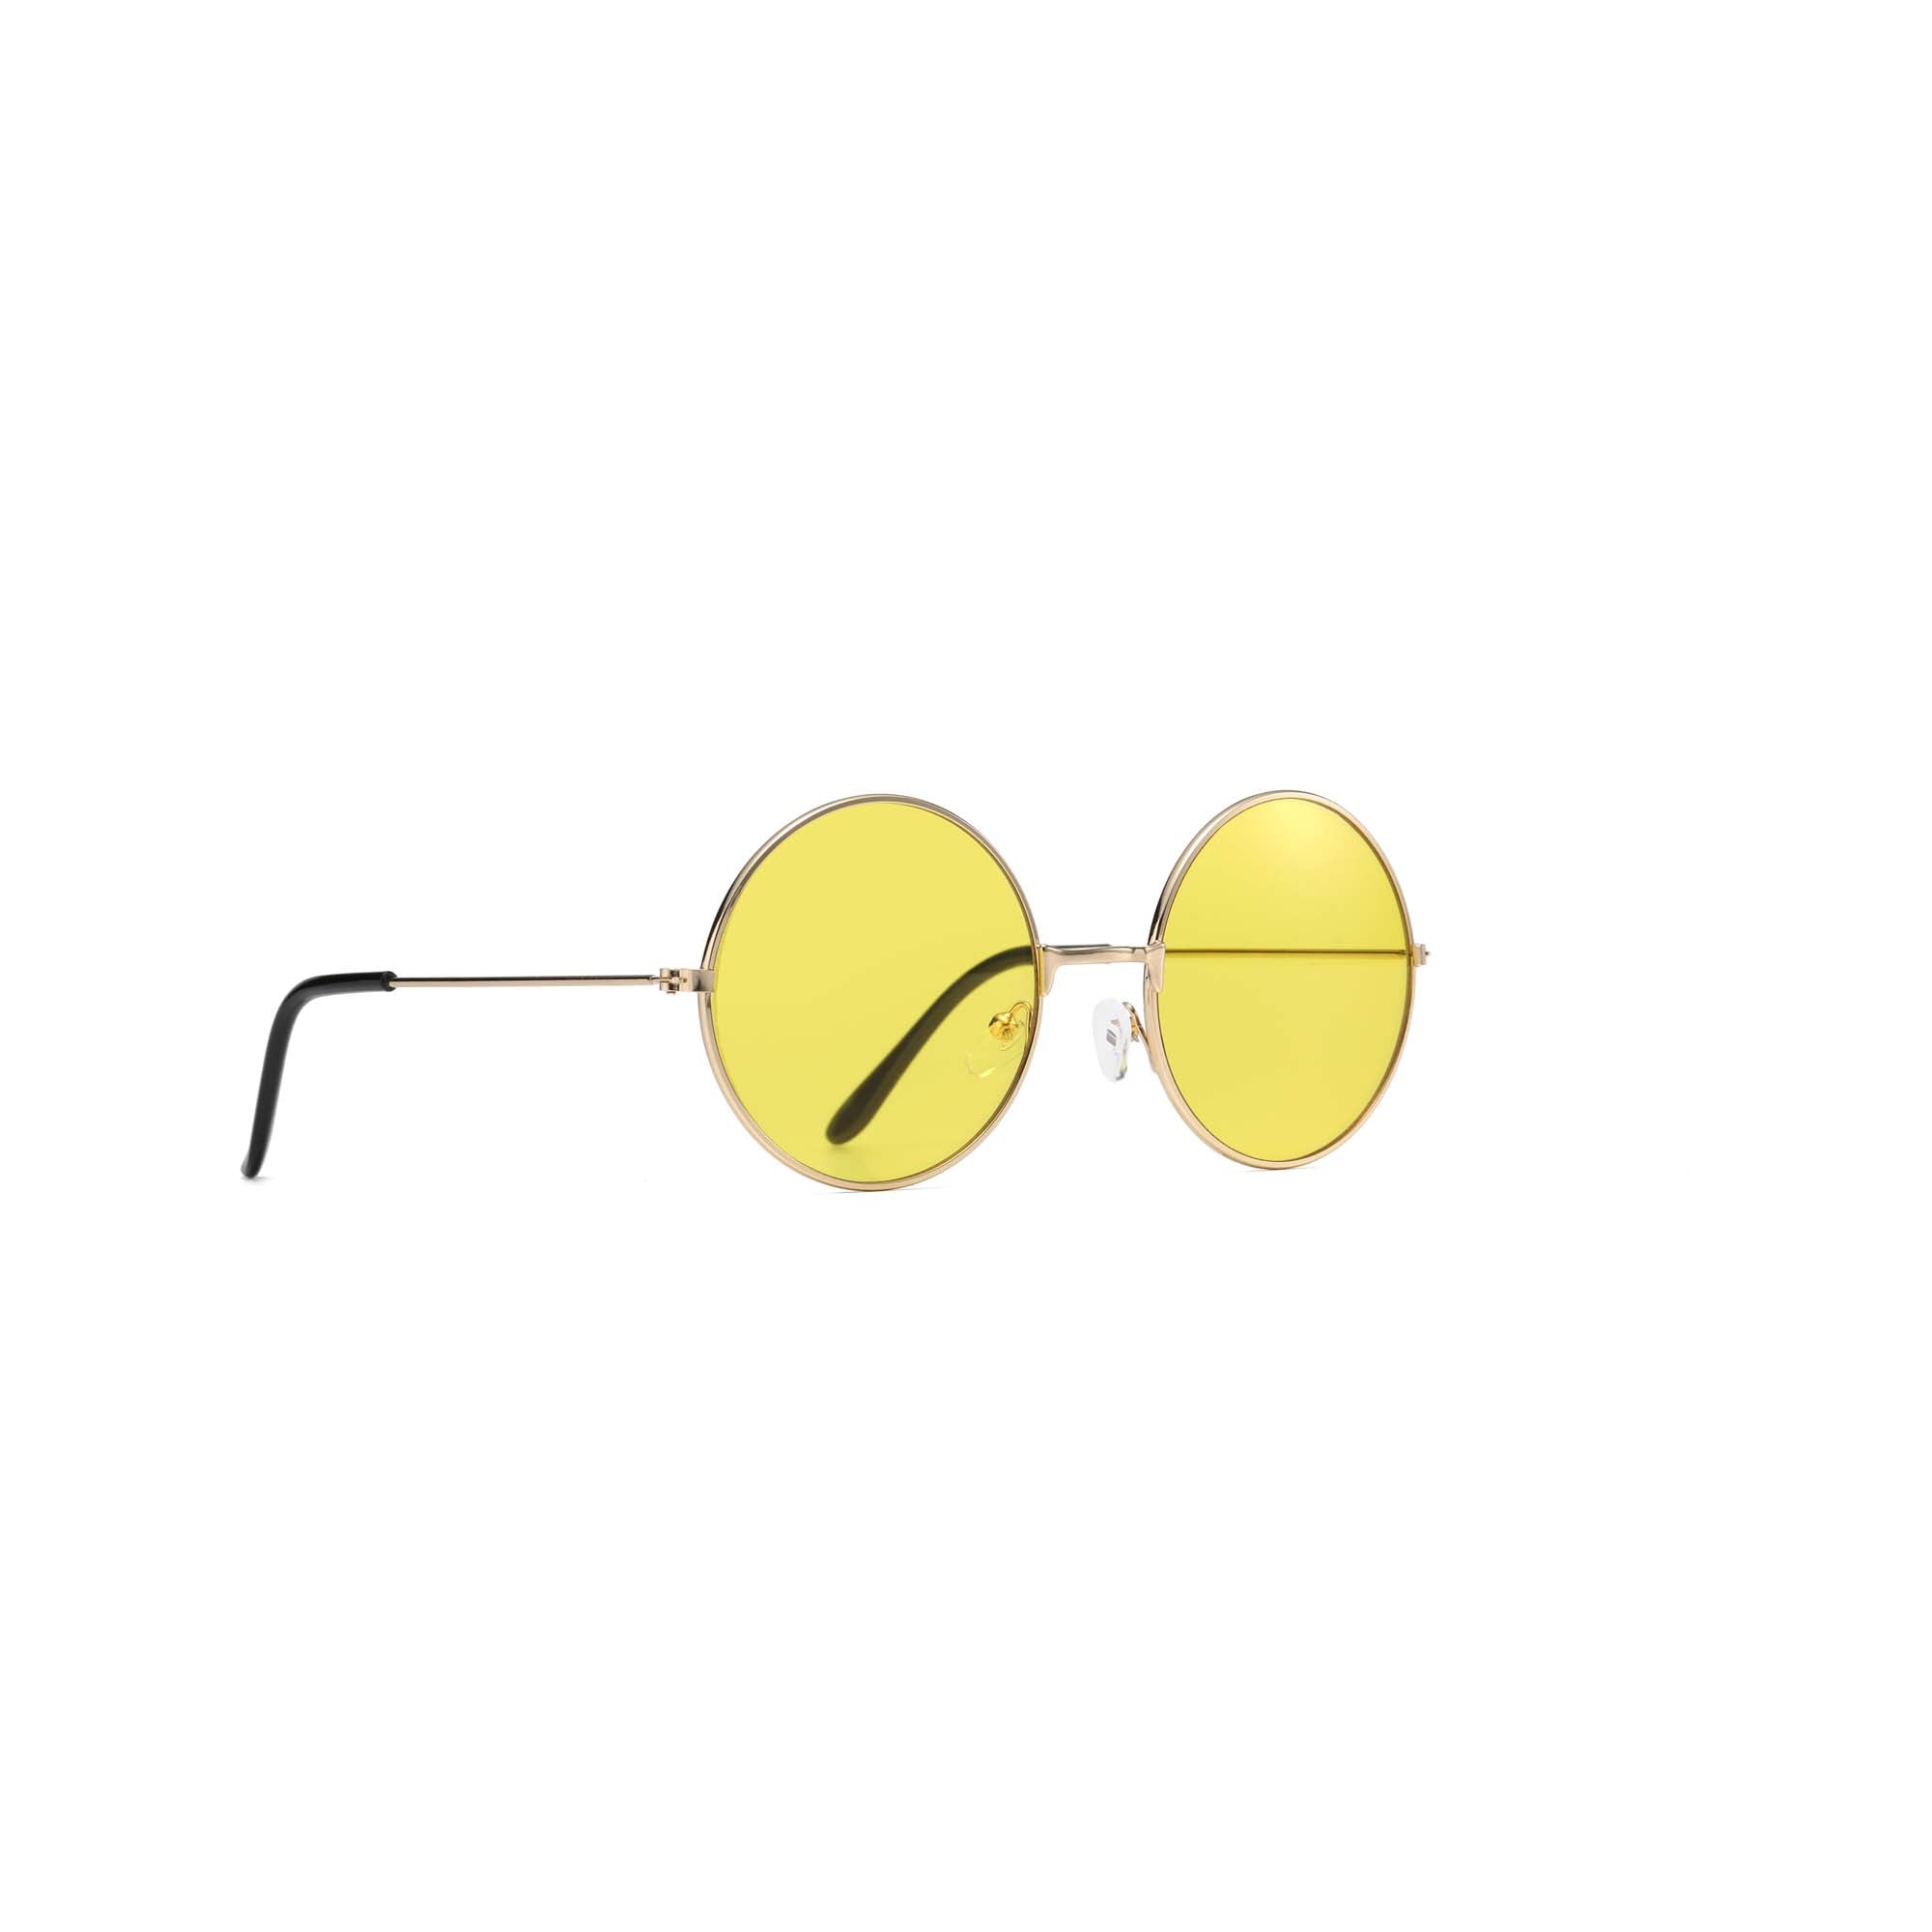 Yellow Hippie Round Glasses for Adults